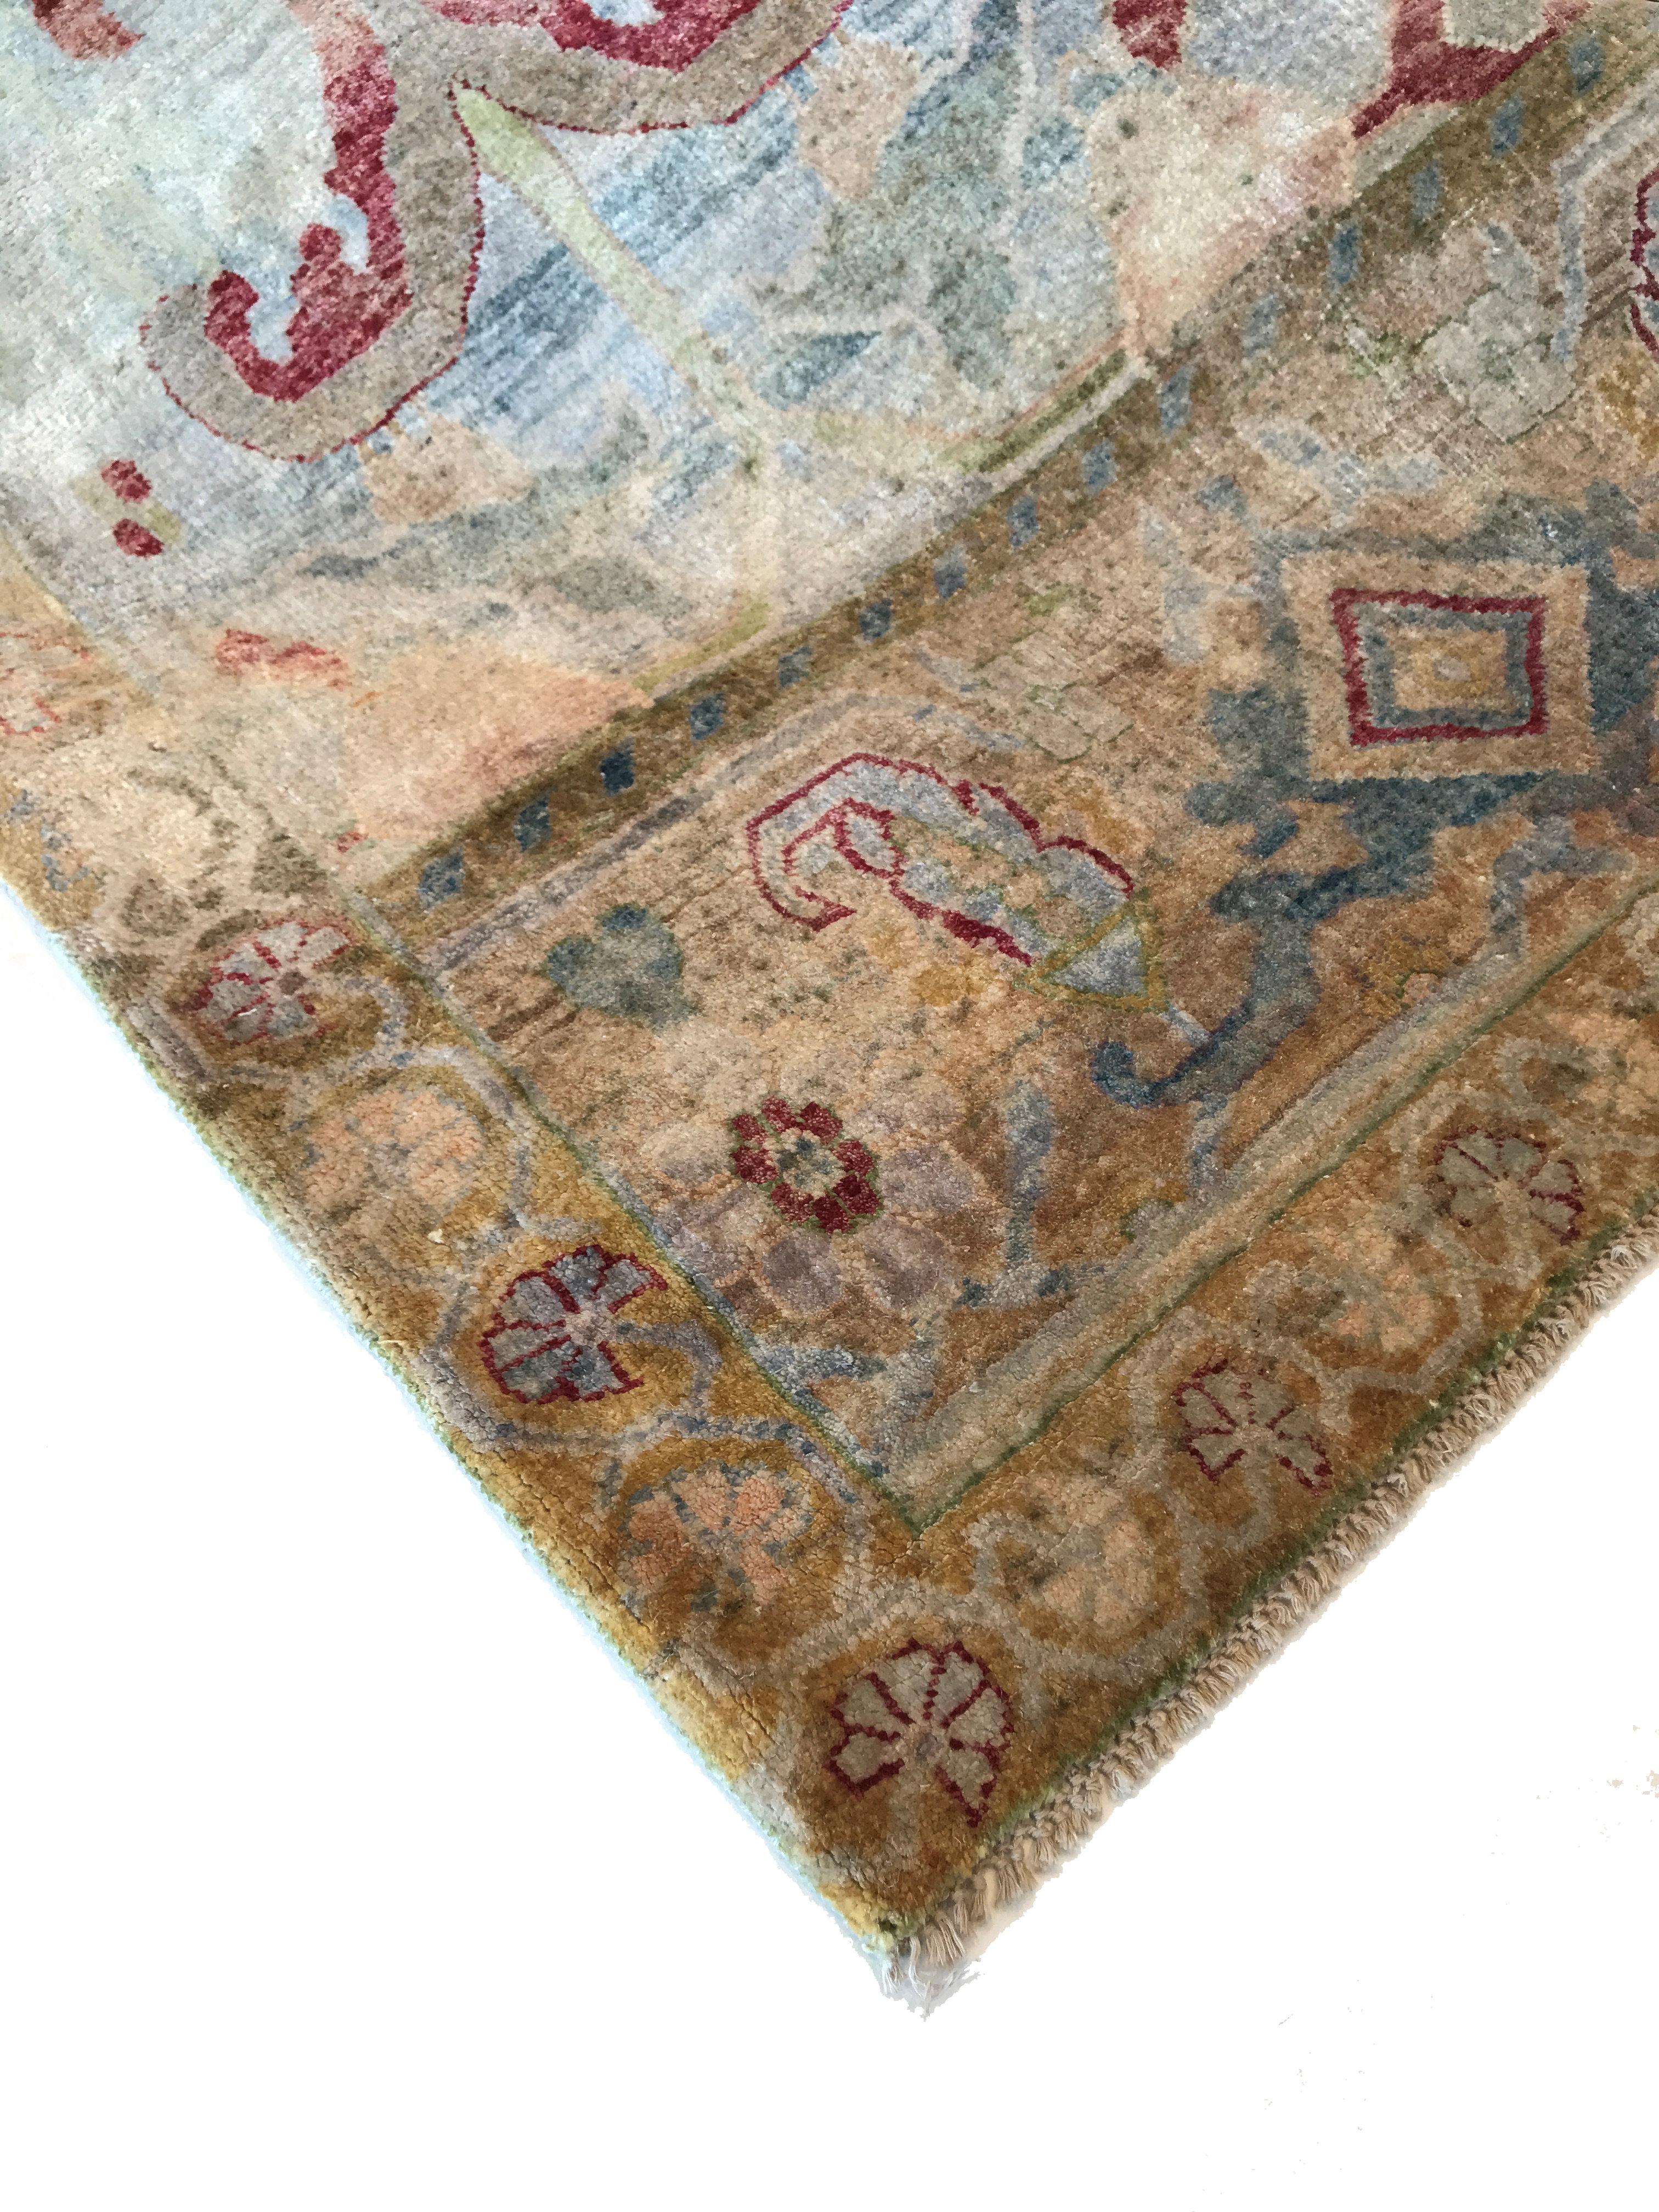 This one-of-a-kind washed silk carpet adds both visual and textural softness and a quiet luxury to any space in your home. The delicate motif inspired by the Arts & Crafts movement sees organic and floral designs enlarged and abstracted for